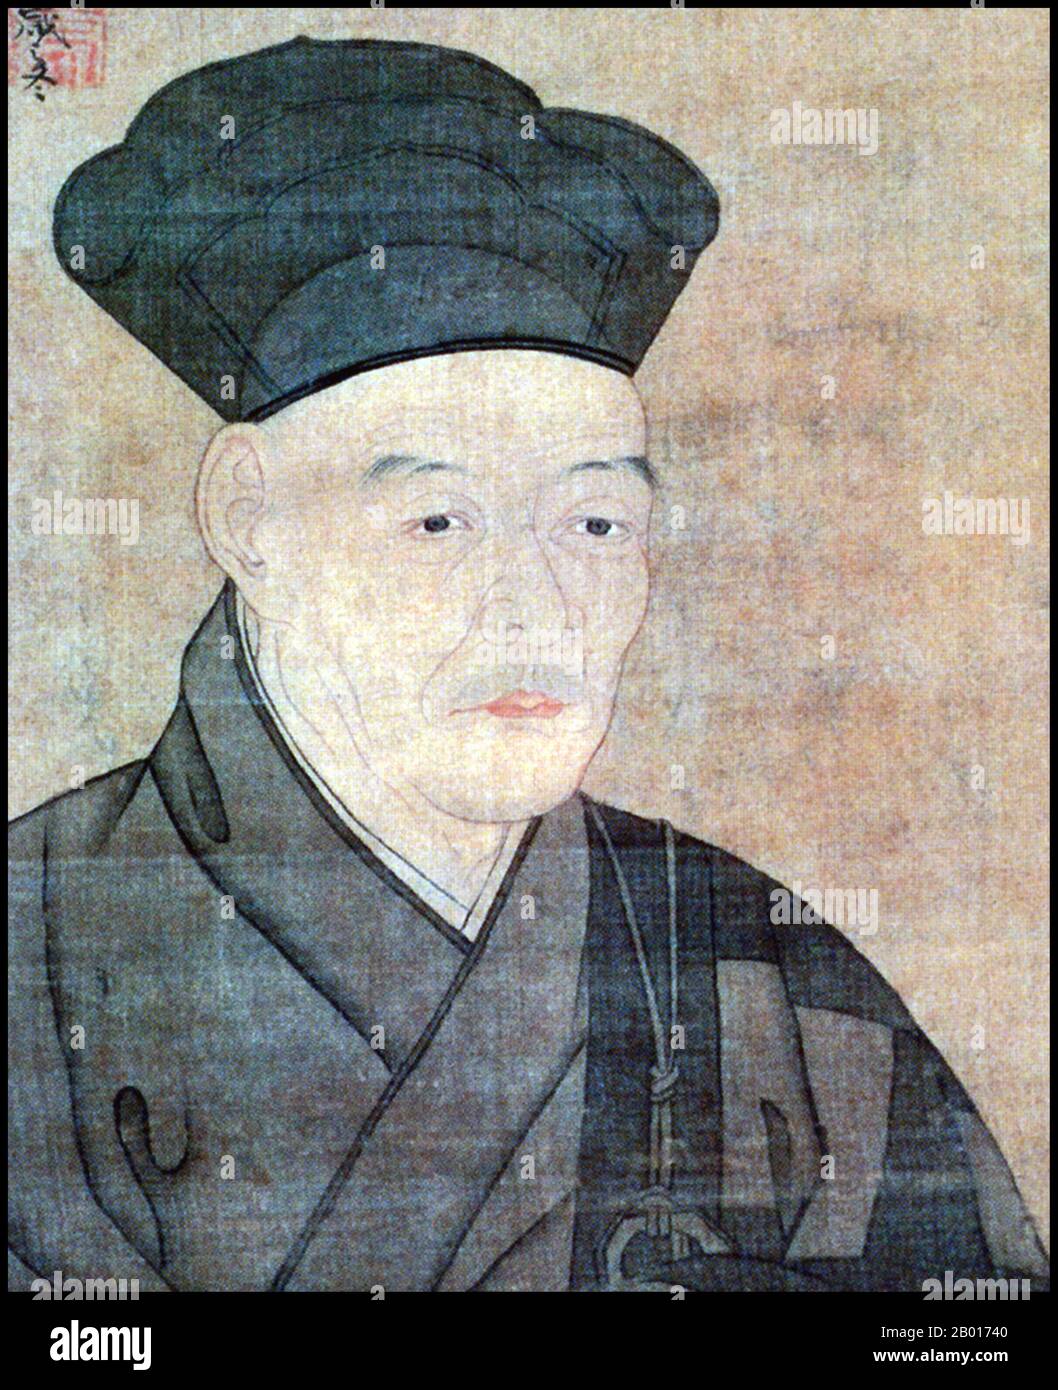 Japan: Sesshu Toyo (1460 - 26 August 1506), painter from the Muromachi period. Copy of a 1491 self-portrait, 16th century.  Sesshu Toyo, also known as Oda Toyo, Bikeisai and Unkoku, was the most prominent Japanese master of ink and wash painting from the middle Muromachi period. Born into the Oda samurai family, he was raised educated to become a Rinzai Zen Buddhist priest. His talent for artistry revealed itself at a young age however, and he eventually became one of the greatest Japanese artists of his time, widely revered throughout Japan and China. Stock Photo